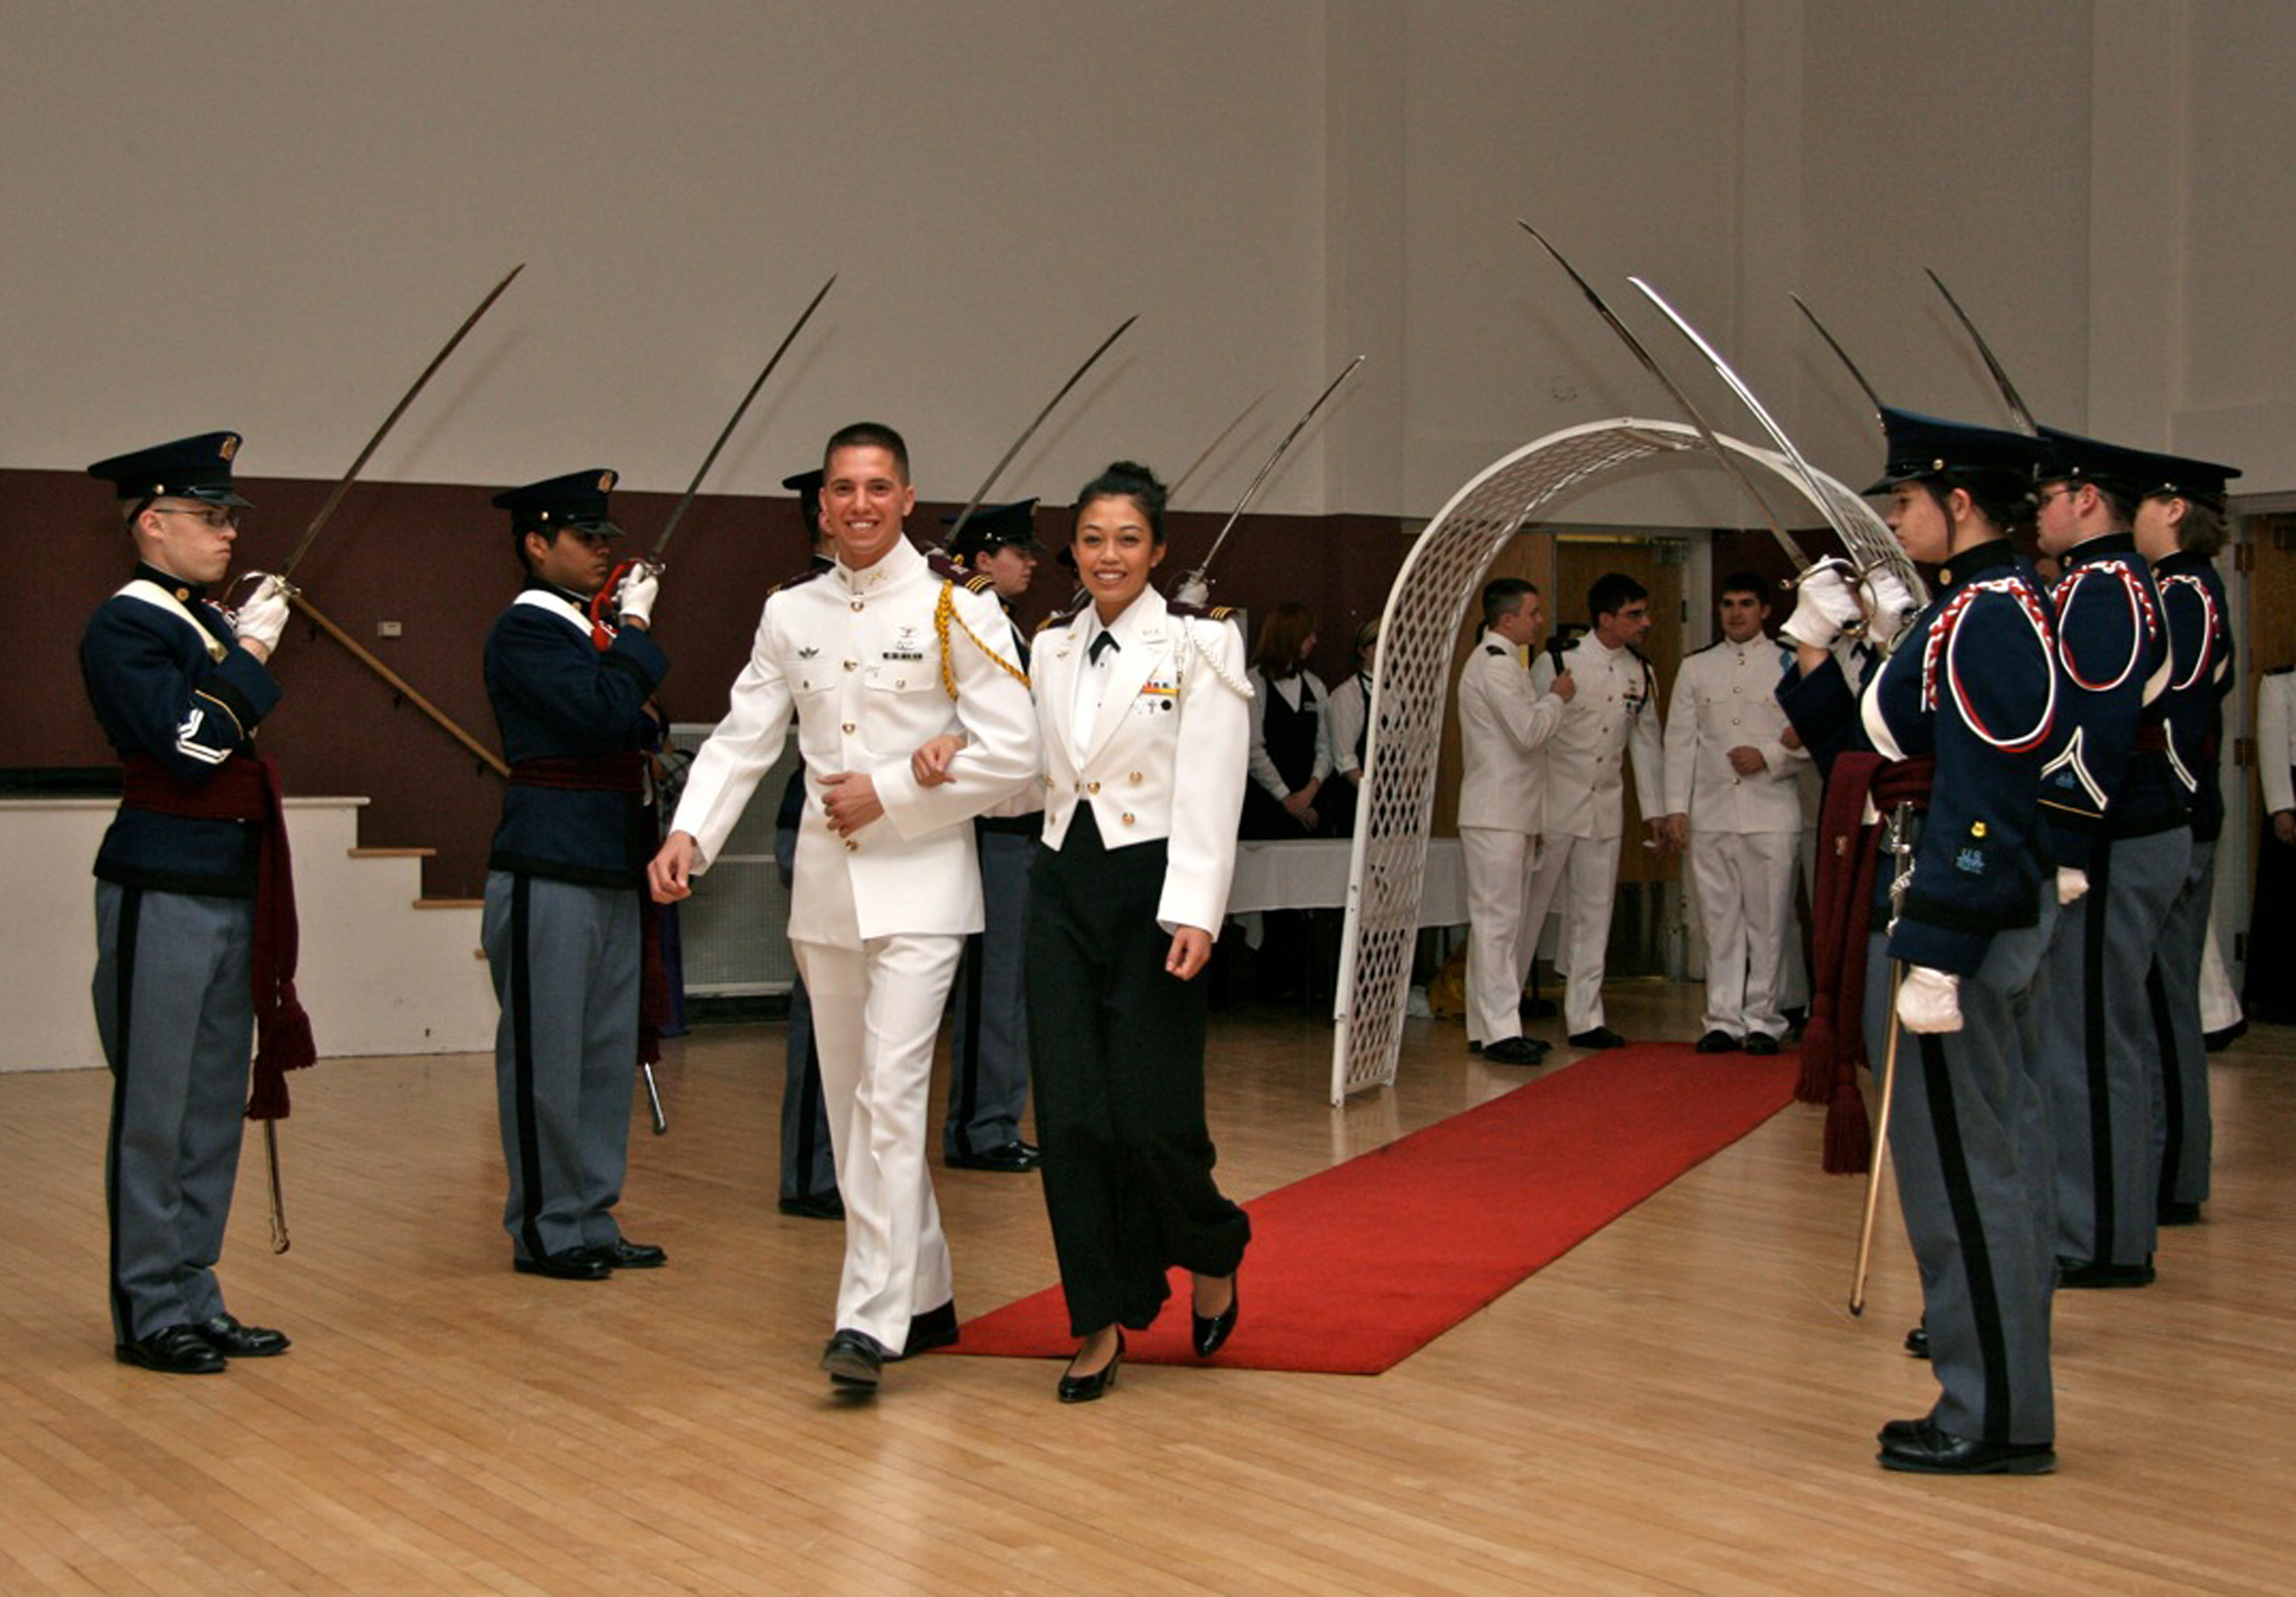 Two senior cadets being presented at the Virginia Tech Corps of Cadets Military Ball in 2010